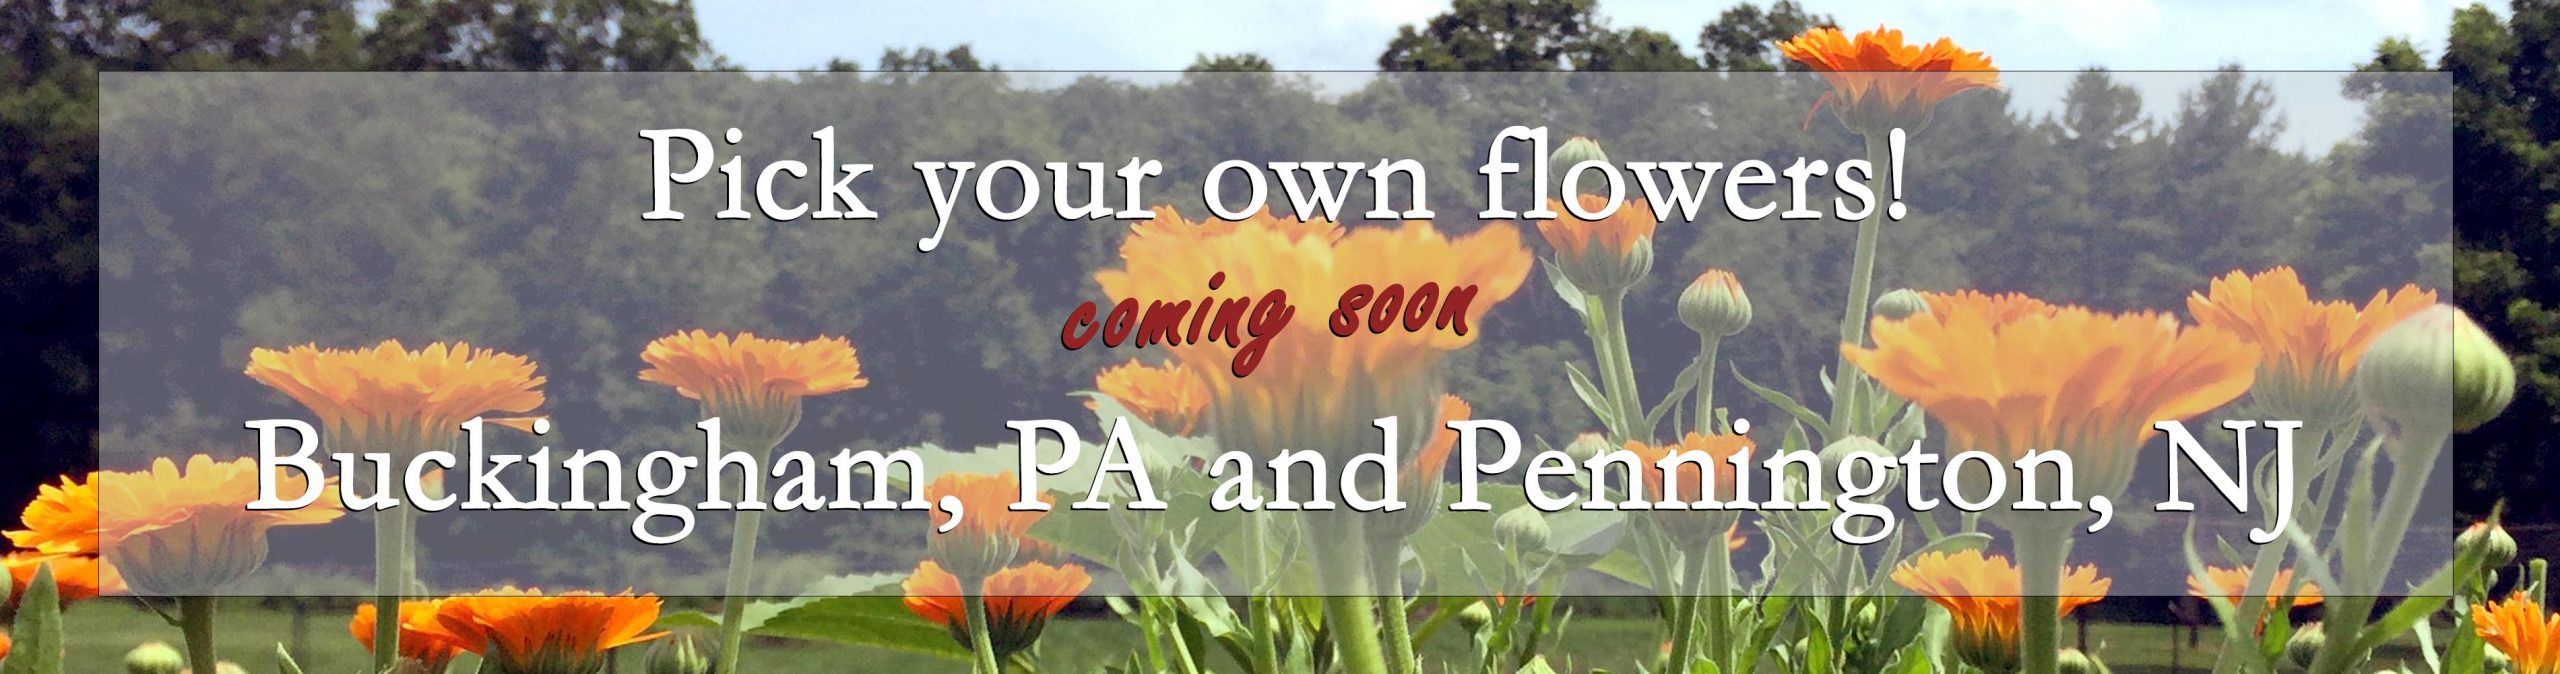 pick your own flowers coming soon!